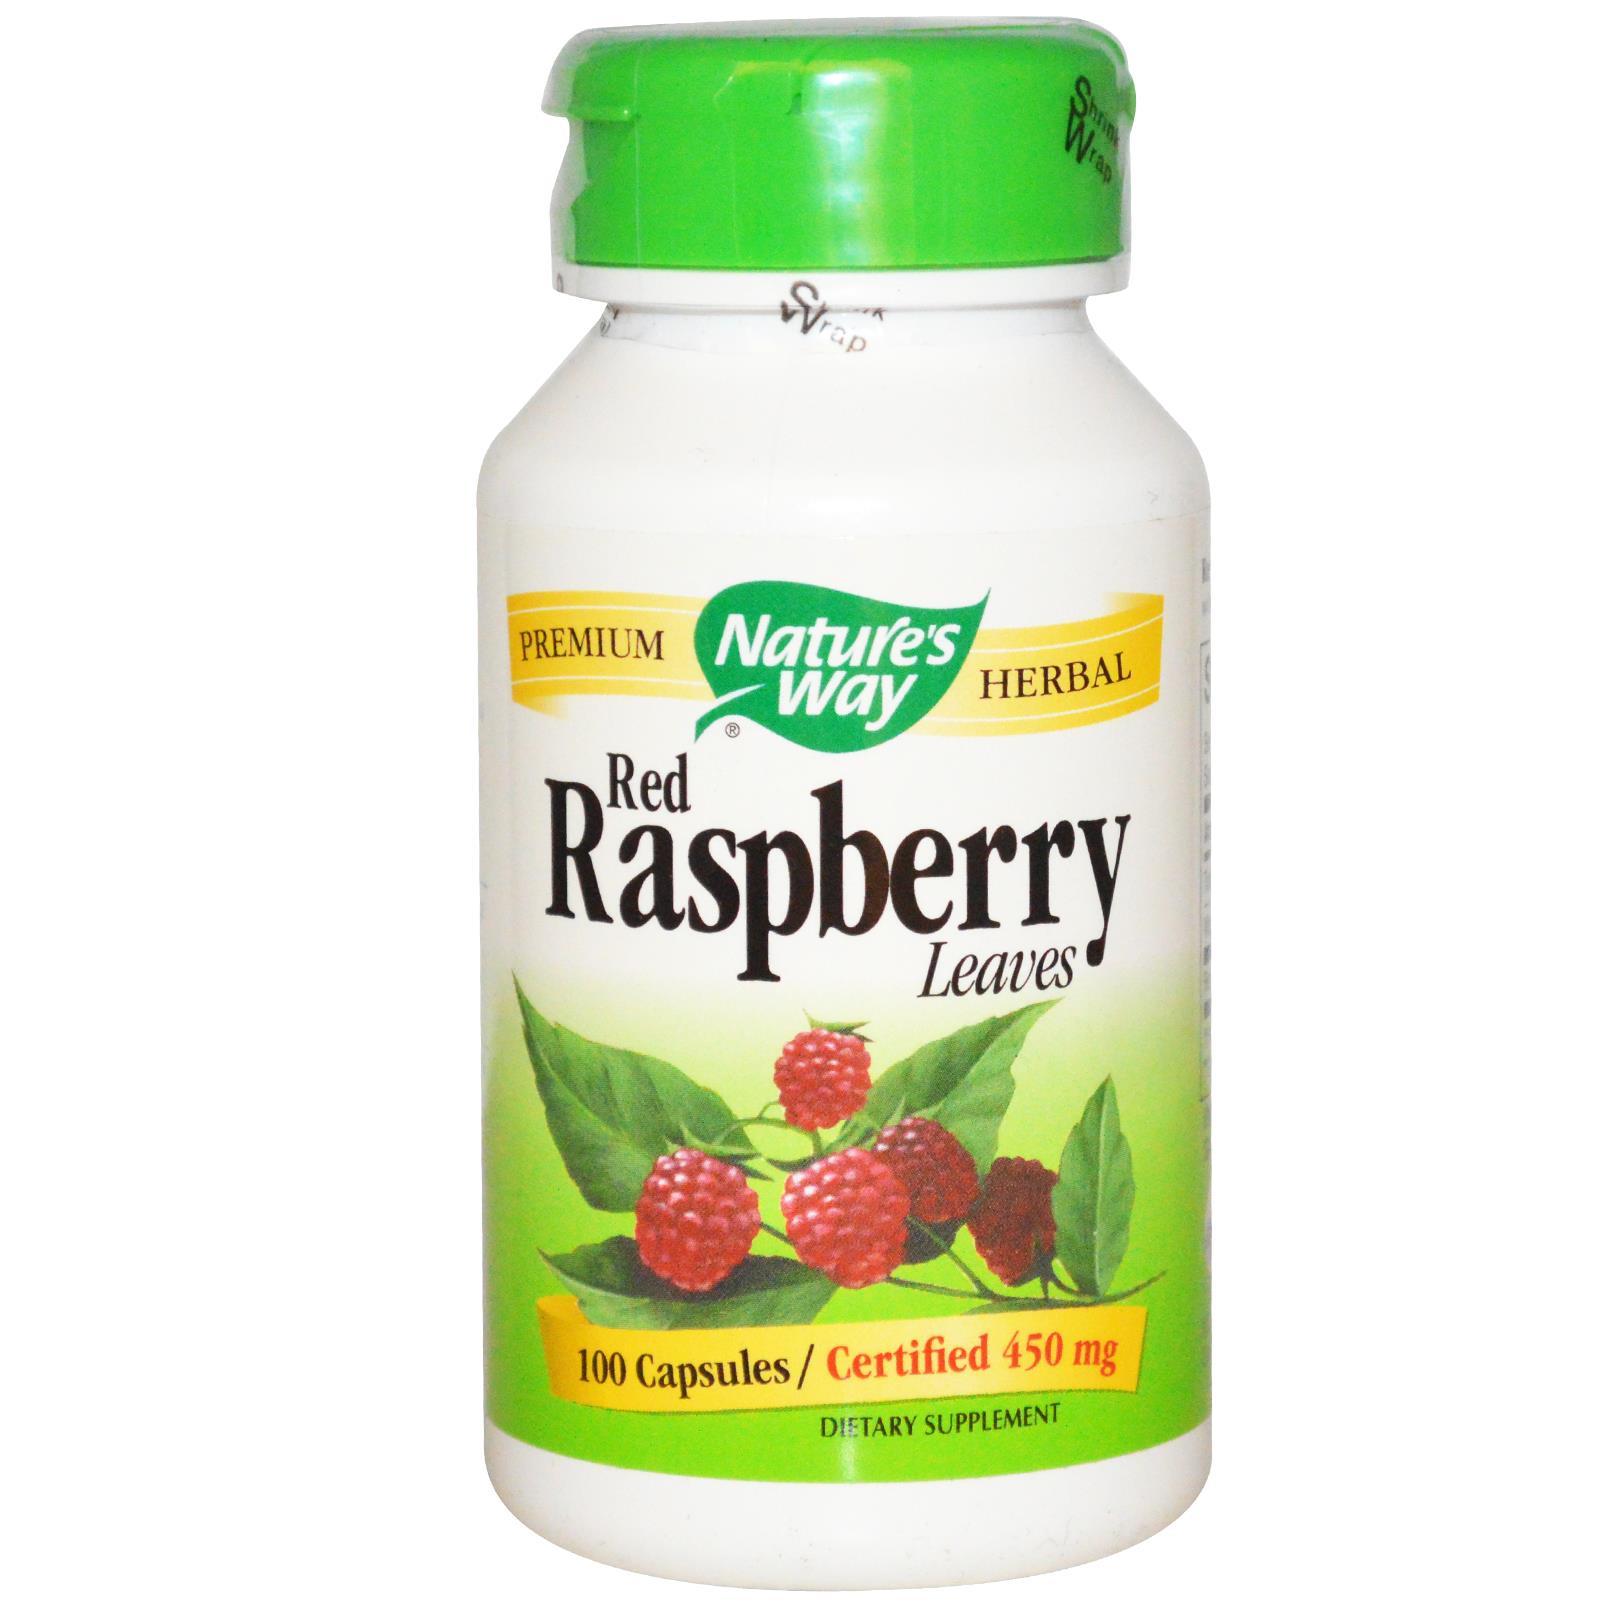 A bottle of Nature's Way Red Raspberry Leaf capsules